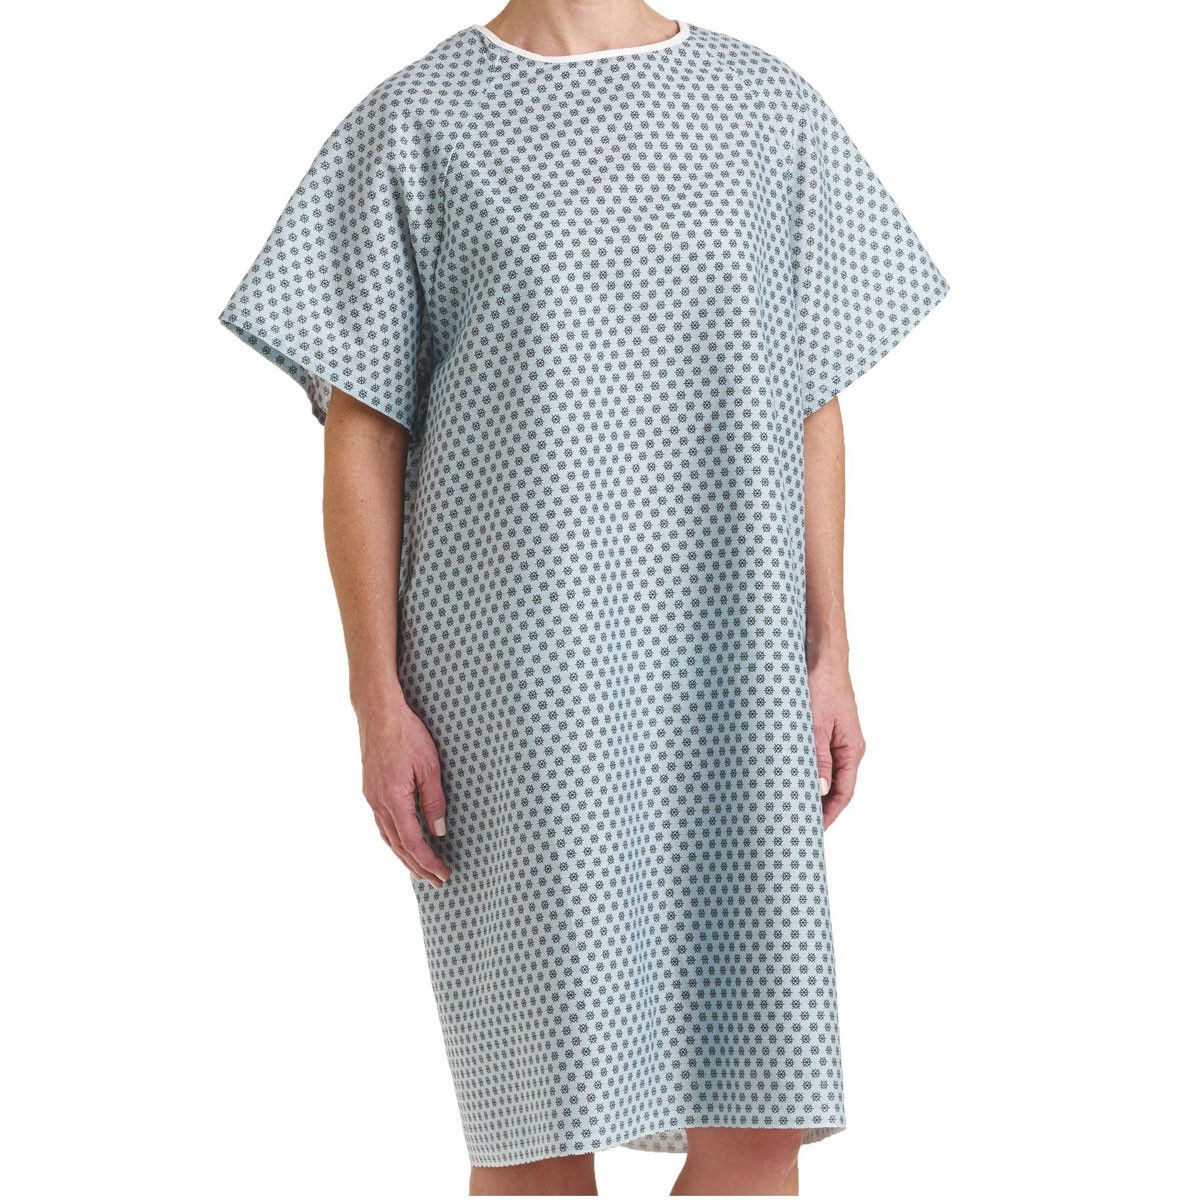 What's the design of this Traditional Patient Gown hospital gown?